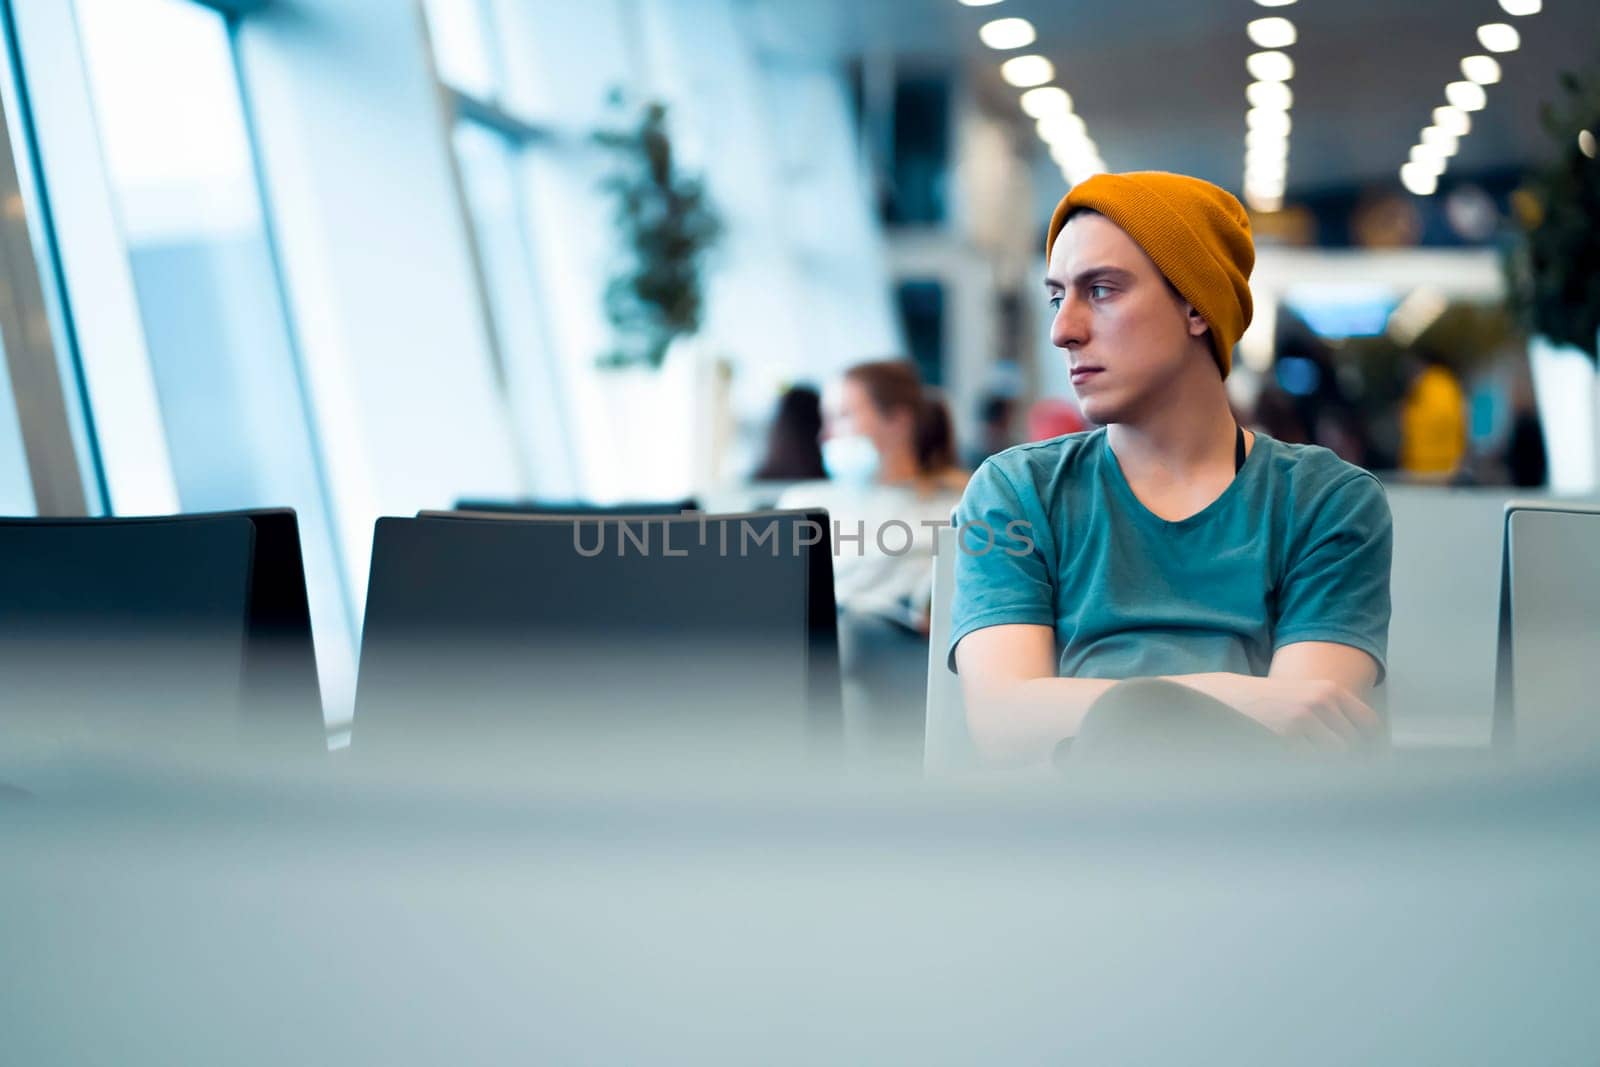 A young man in casual clothes sits at the airport waiting hall, waits for the plane while traveling, is in the transit area before arrival or departure.